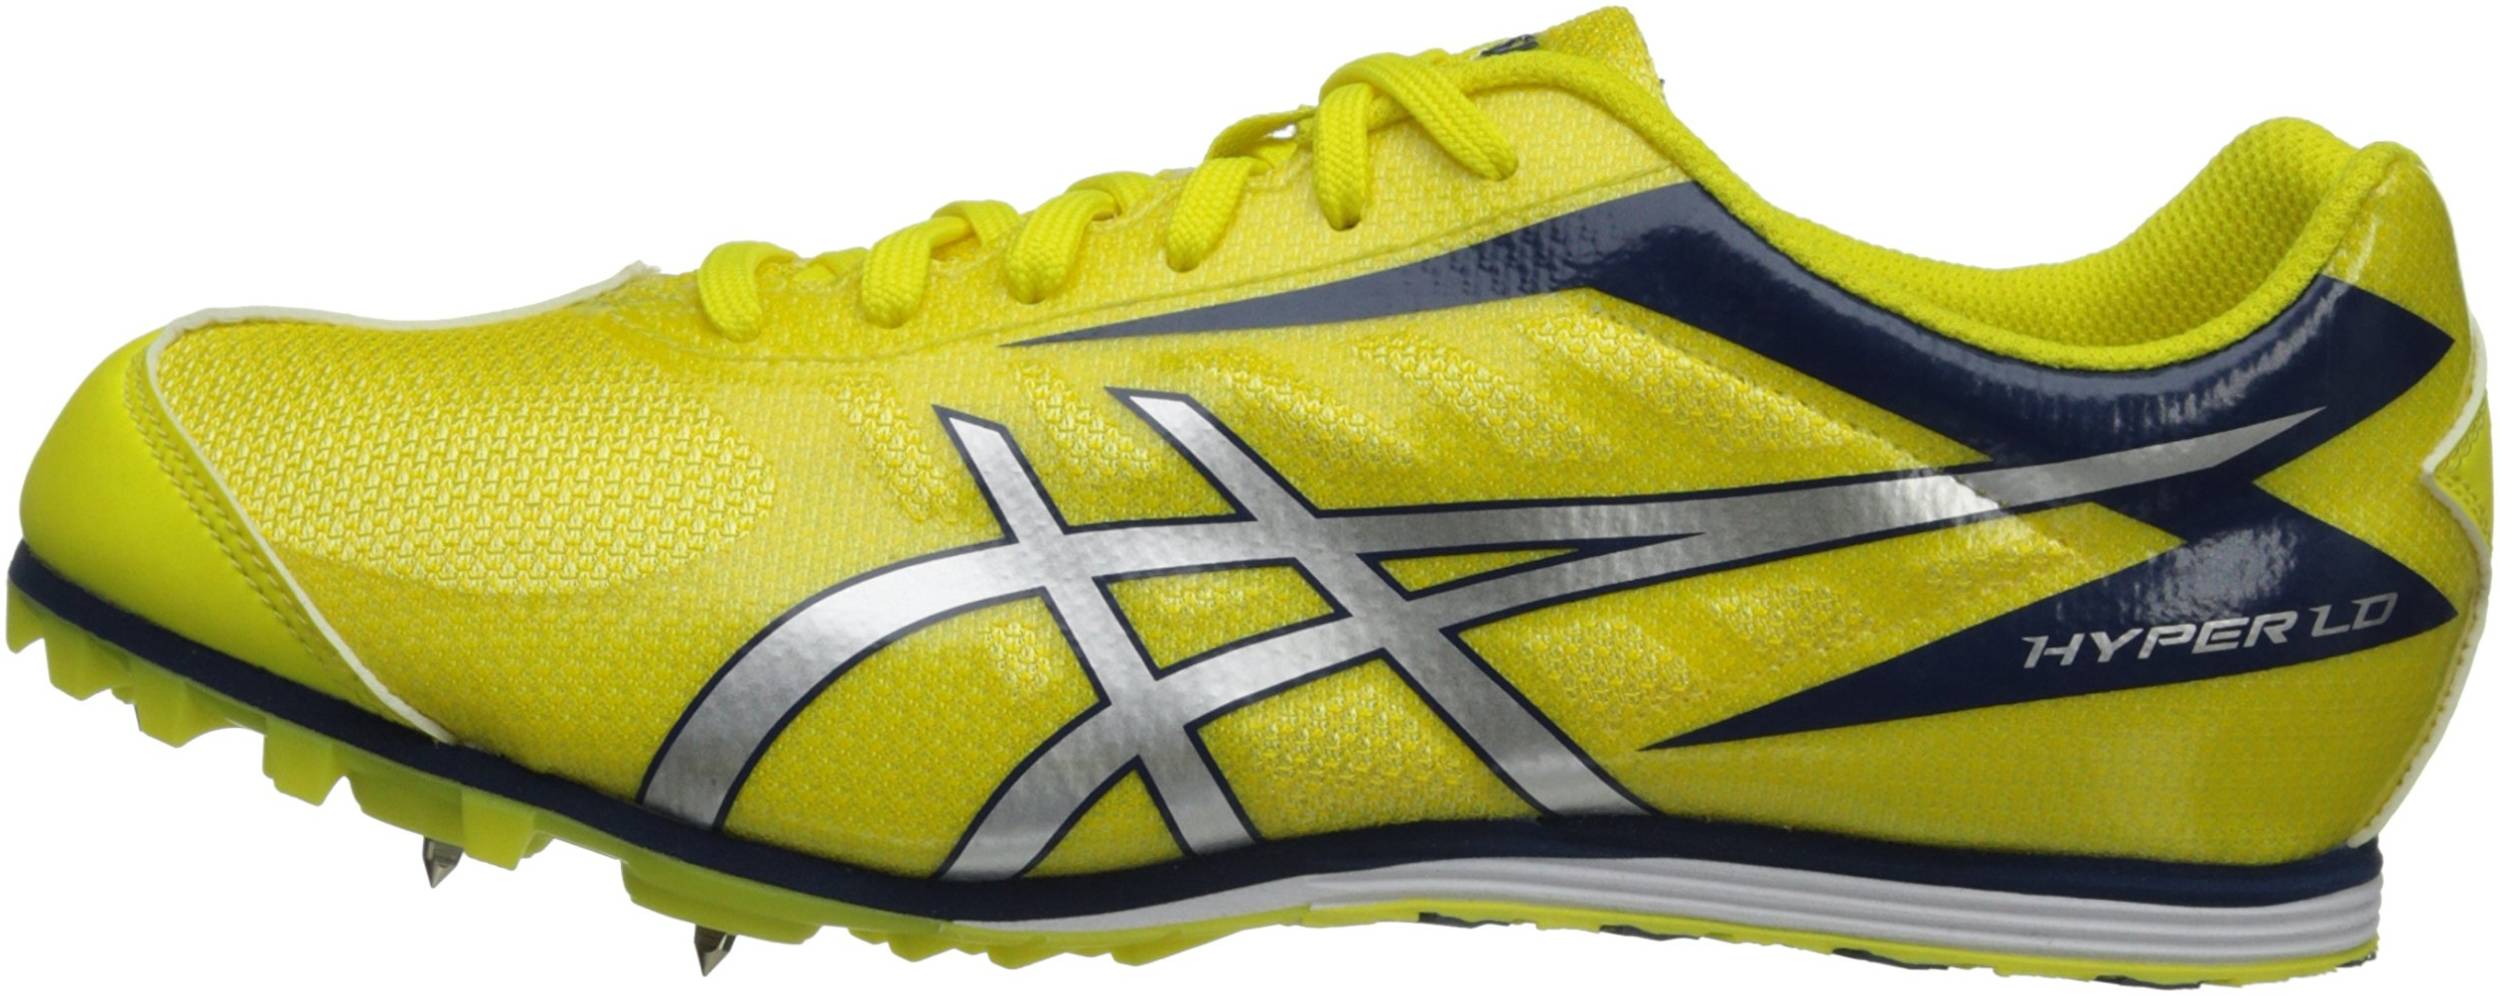 Disapproved Temptation Explanation ASICS Hyper LD 5 Review 2023, Facts, Deals ($40) | RunRepeat